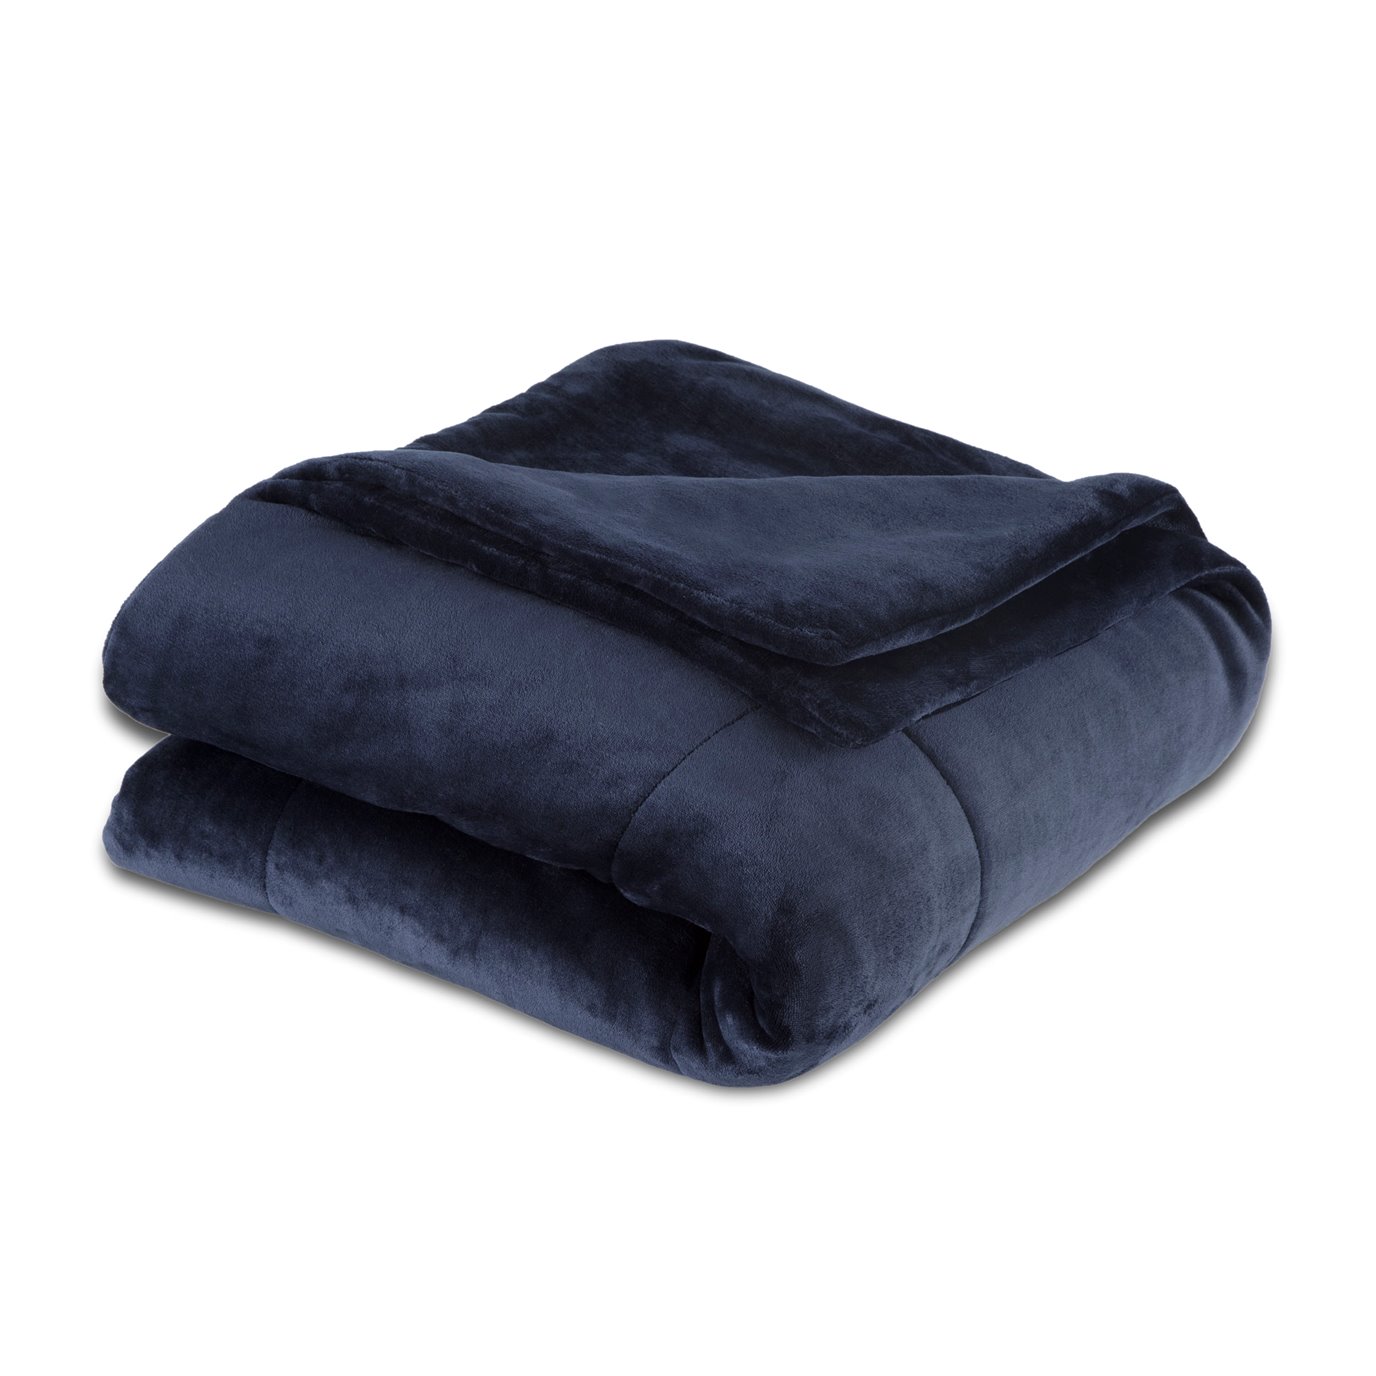 Vellux PlushLux Filled Twin Midnight Blue Blanket